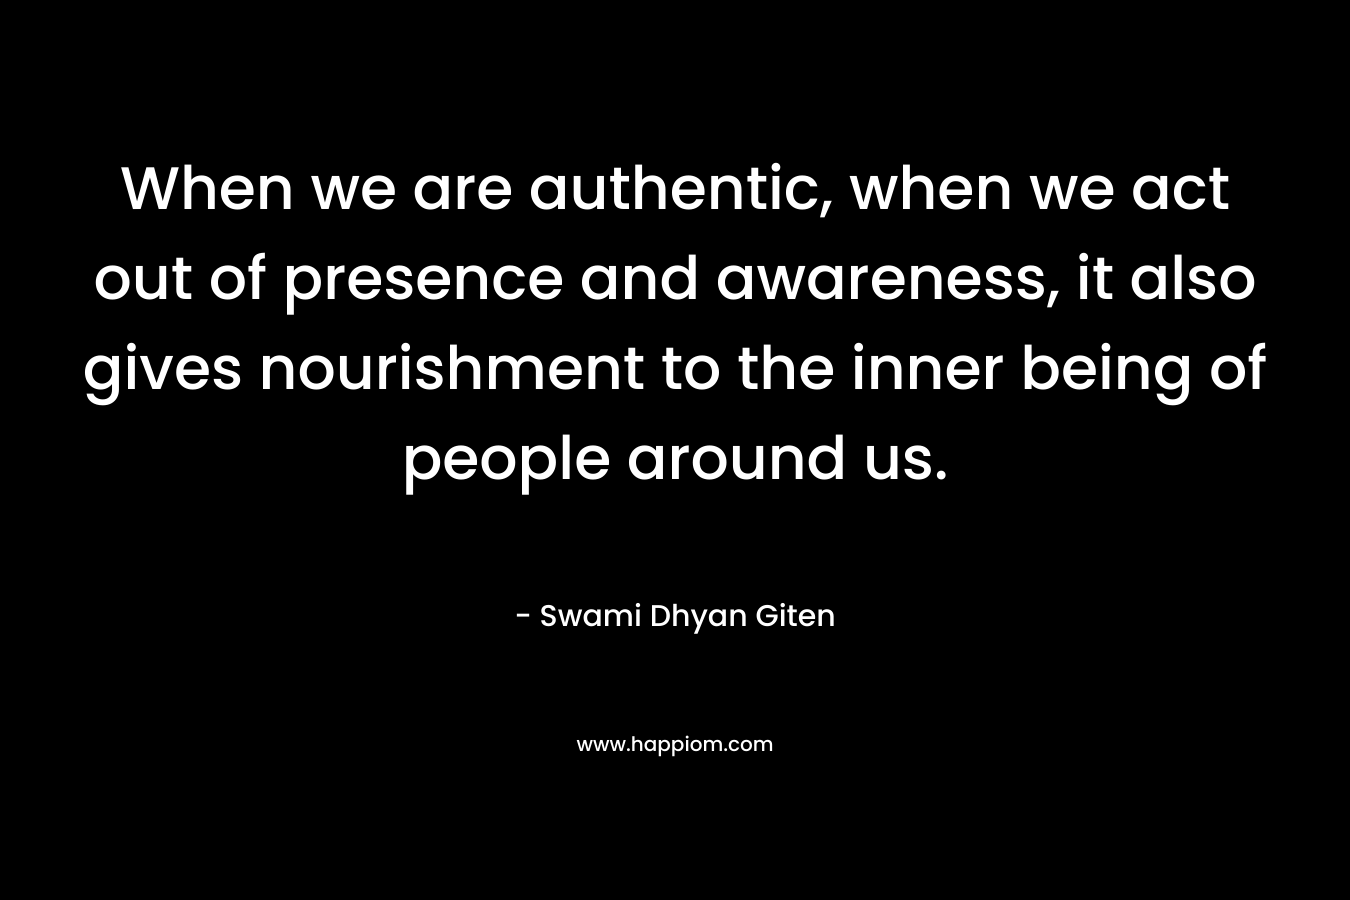 When we are authentic, when we act out of presence and awareness, it also gives nourishment to the inner being of people around us.